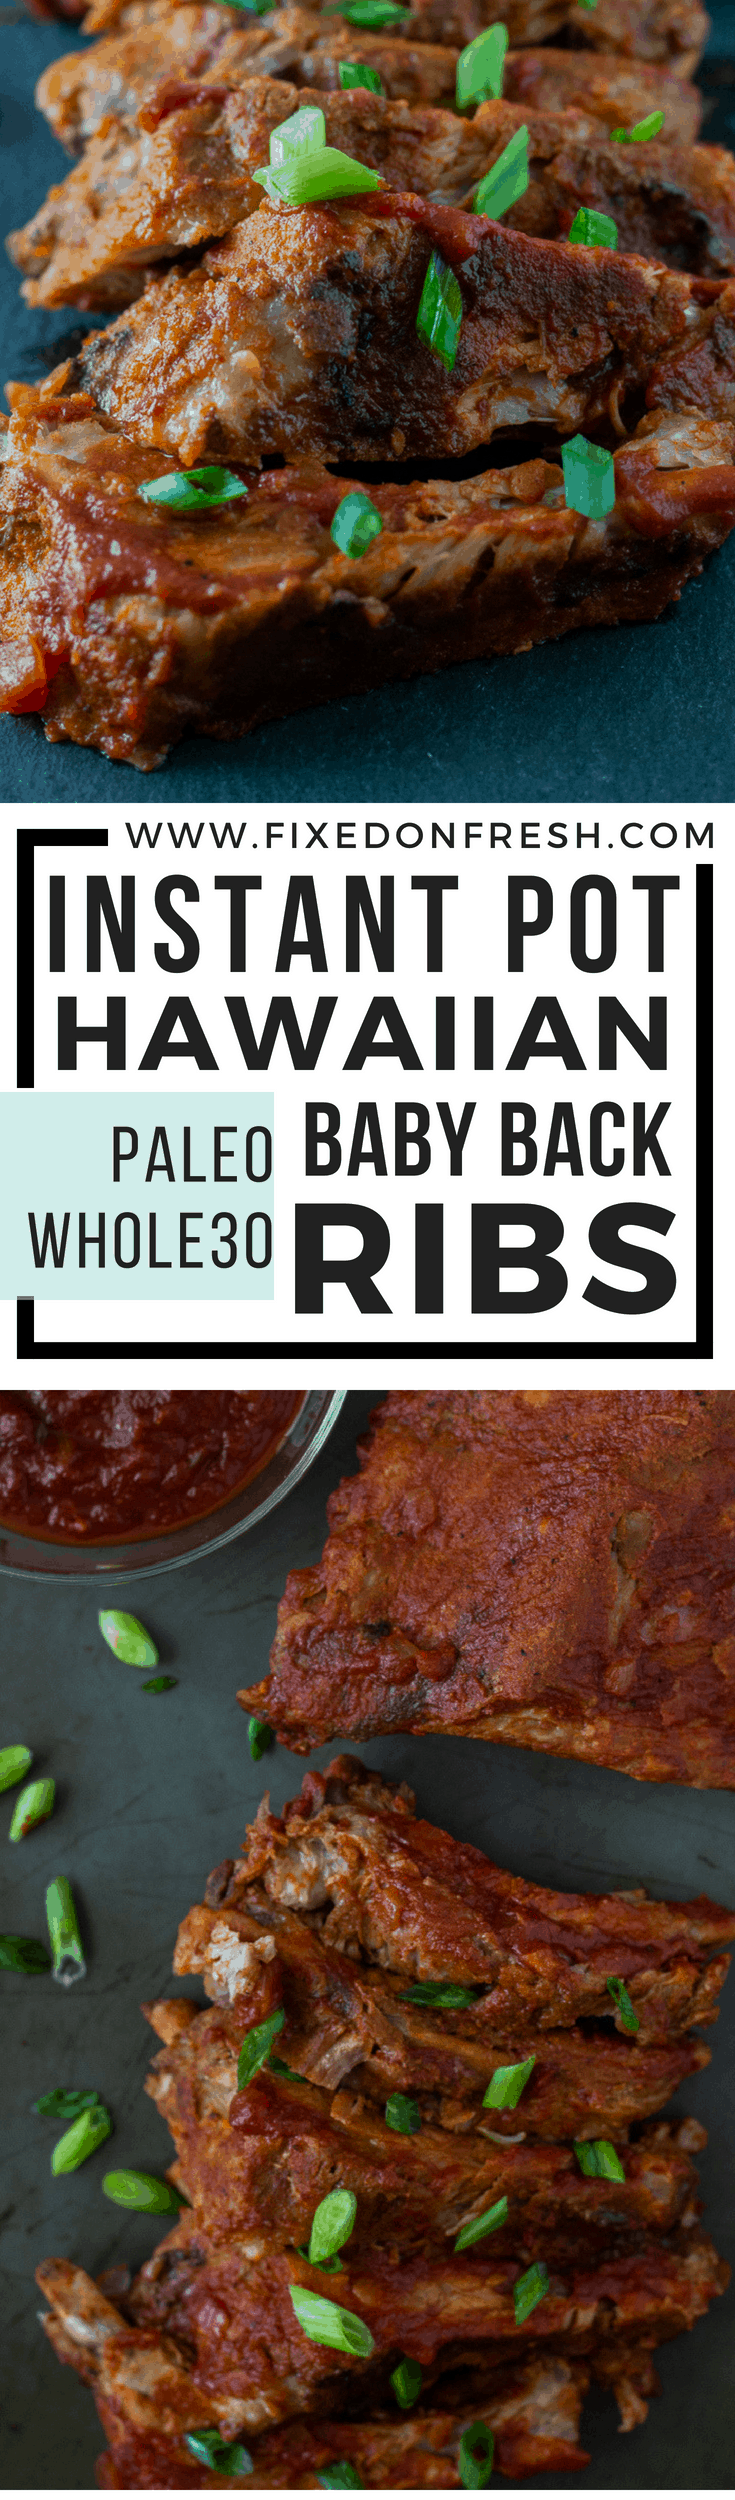 Instant Pot Paleo Hawaiian pork Baby Back Ribs recipe fall off the bone and have a sweet sticky and delicious homemade bbq sauce. These have a whole30 and Paleo option as well and are great for summer parties. #whole30 #ribs